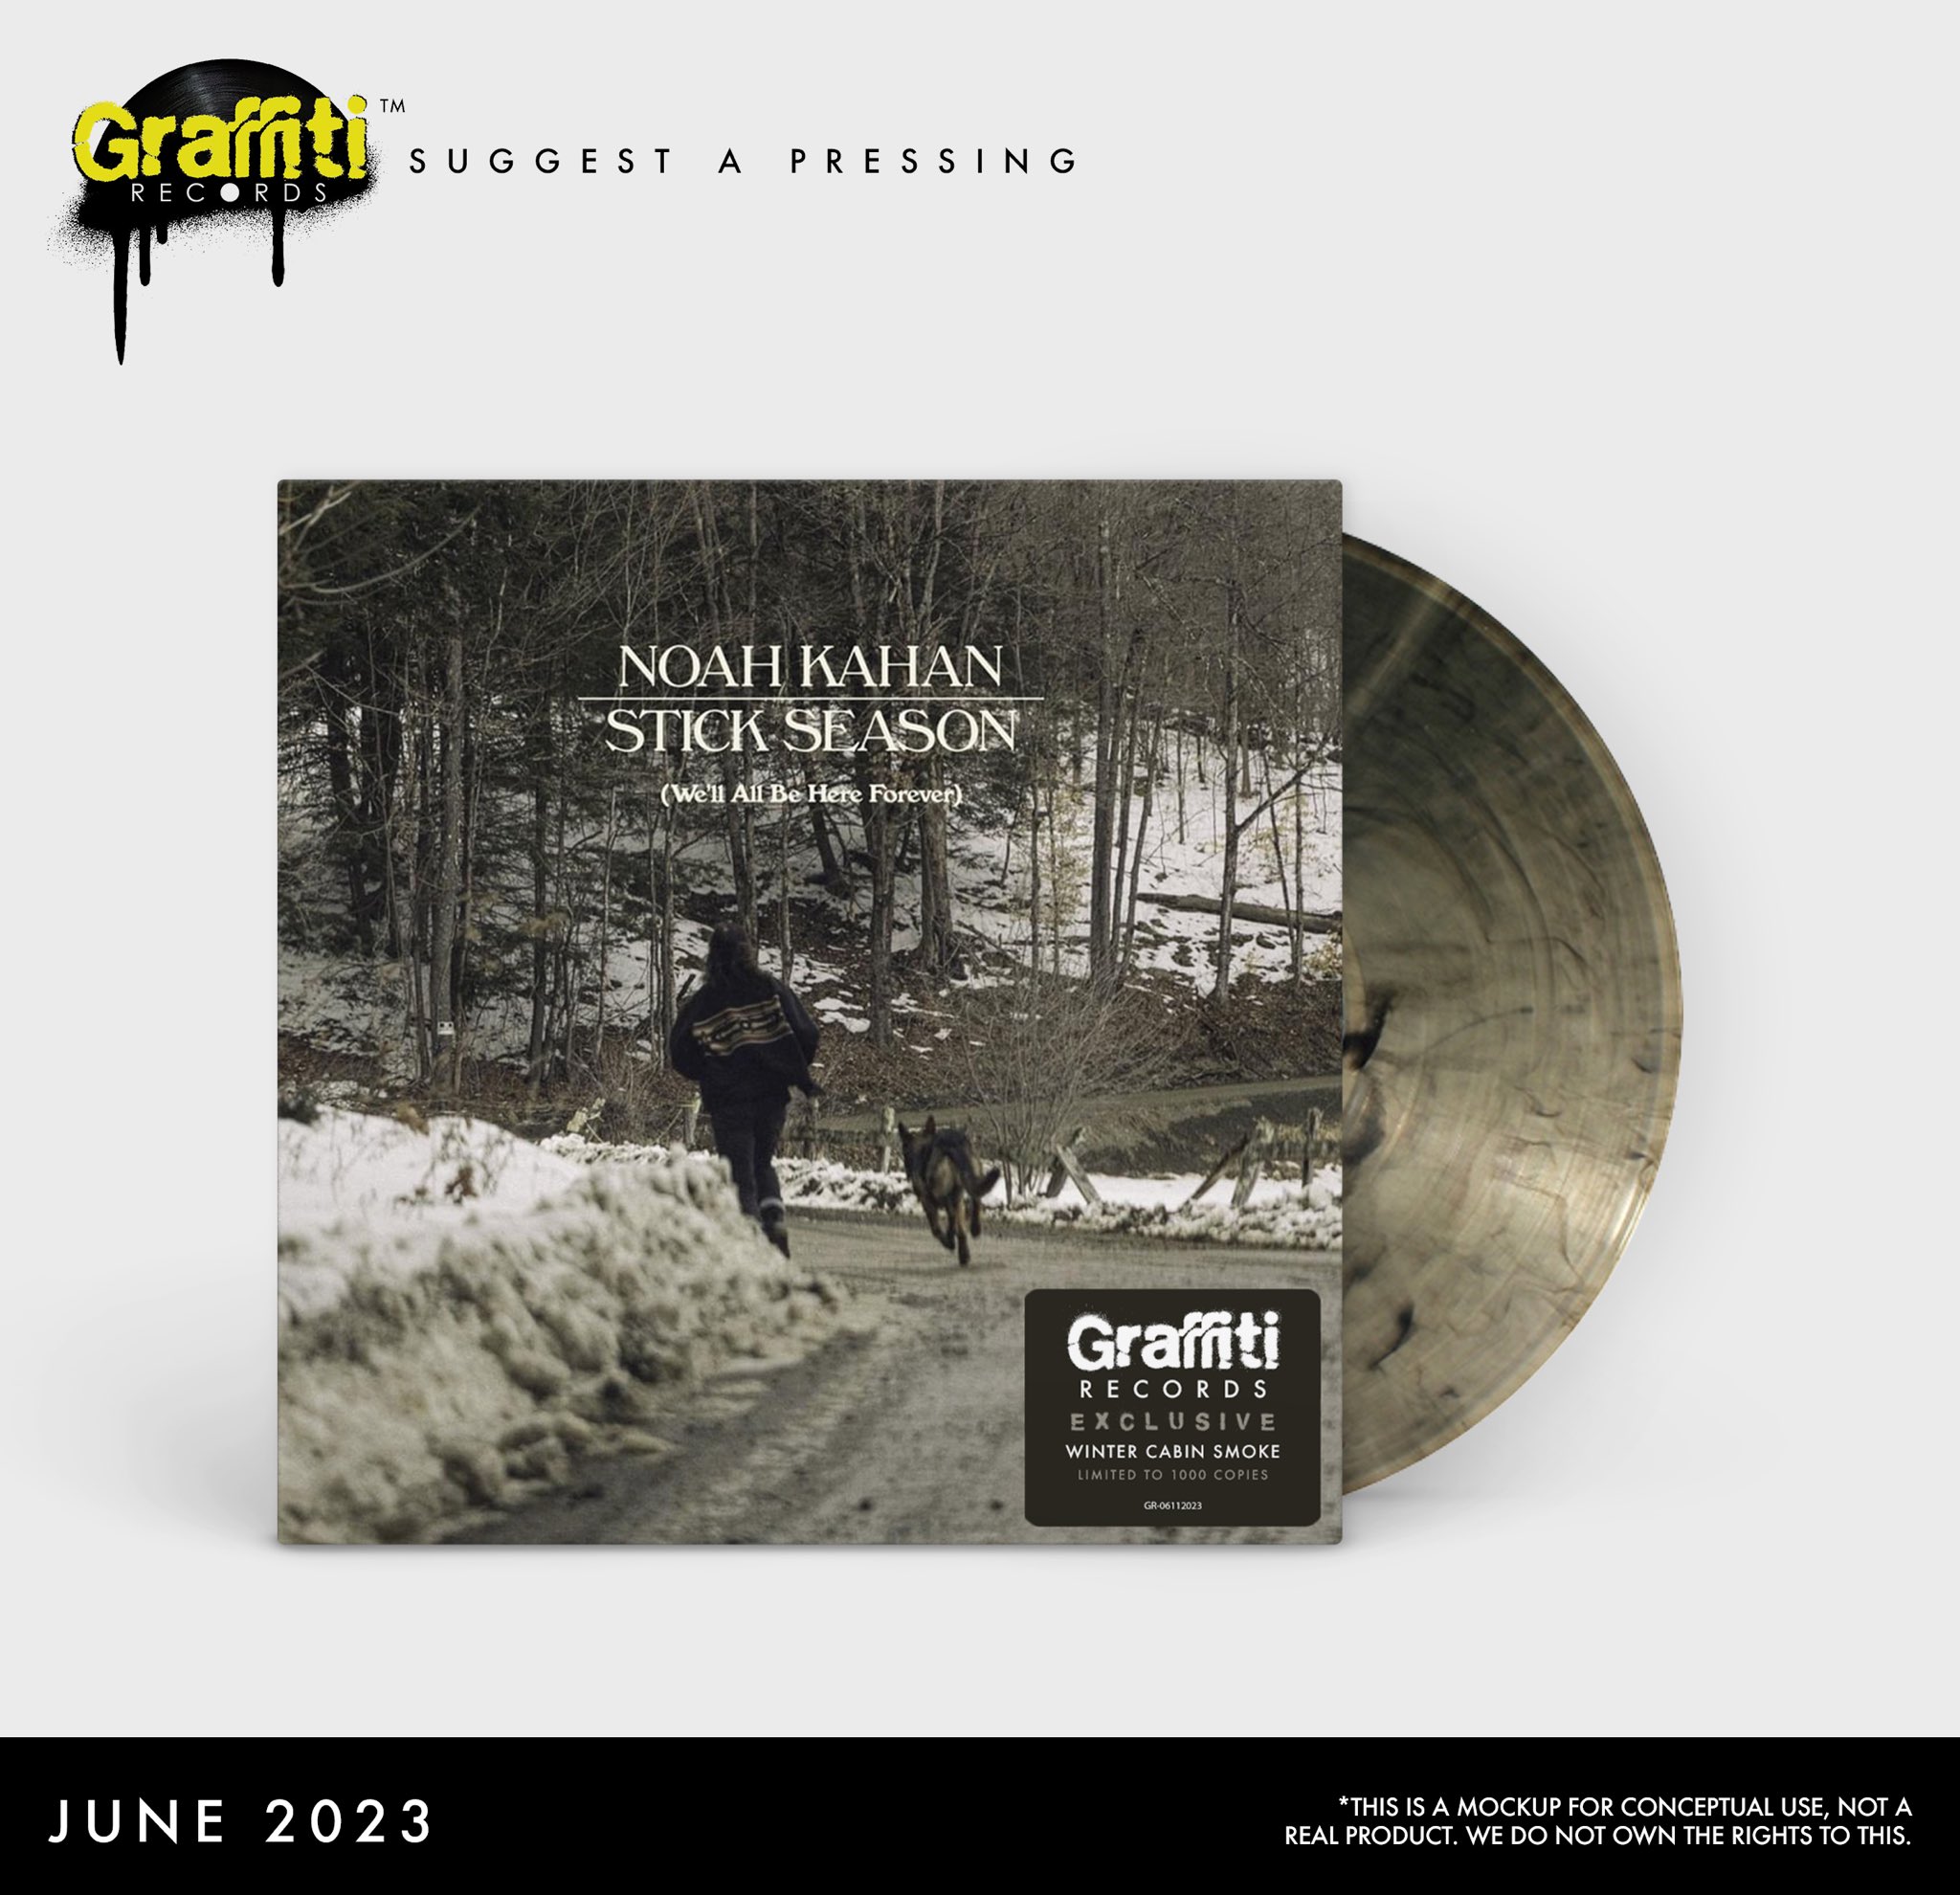 Graffiti Records on X: SUGGEST A PRESSING: Noah Kahan - Stick Season  (We'll All Be Here Forever) vinyl. #noahkahan #stickseason  #wellallbehereforever #vinyl #SuggestAPressing @NoahKahan   / X